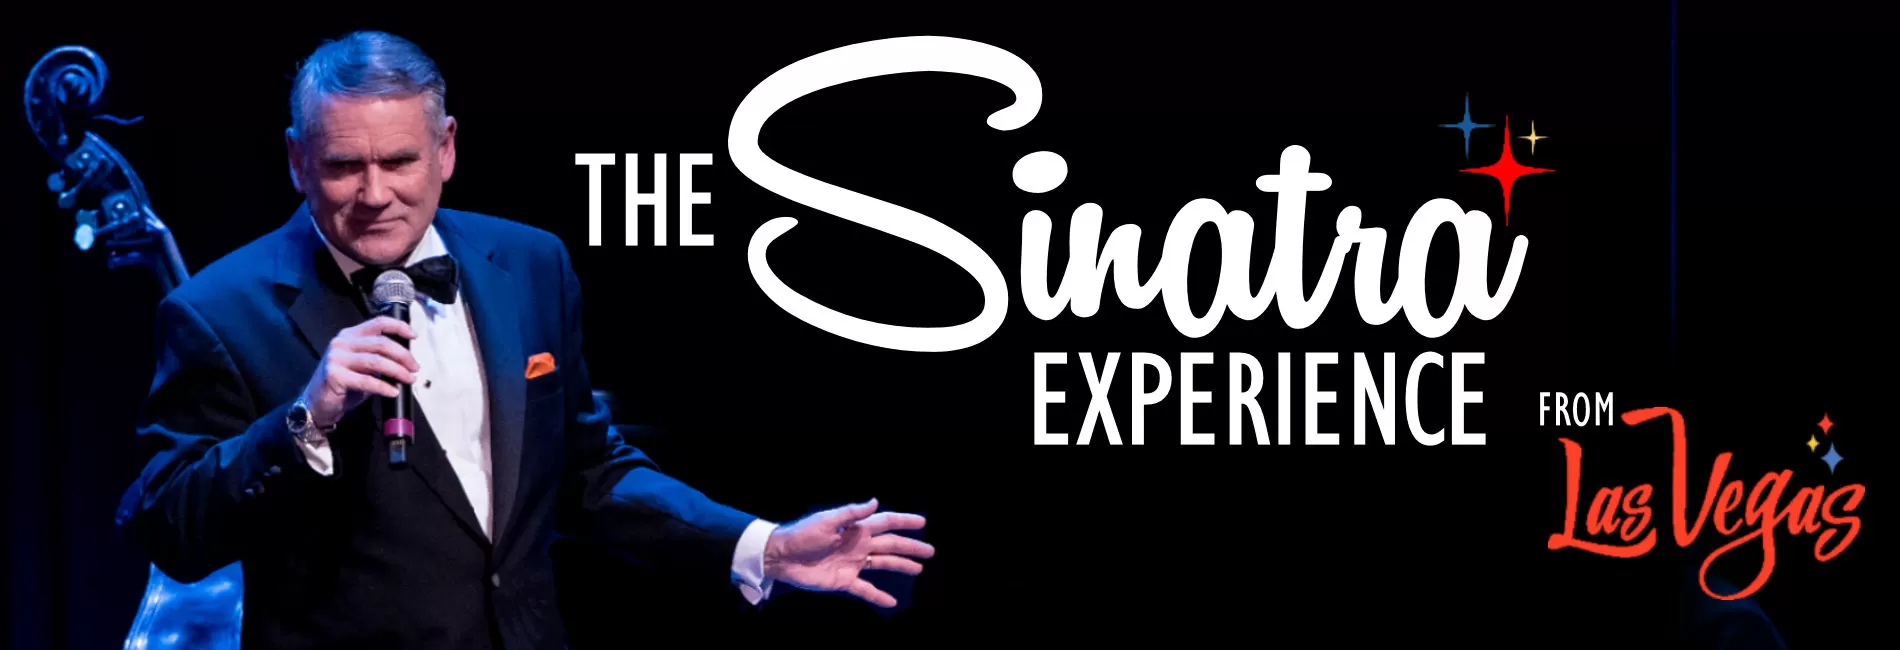 The Sinatra Experience with Dave Halston